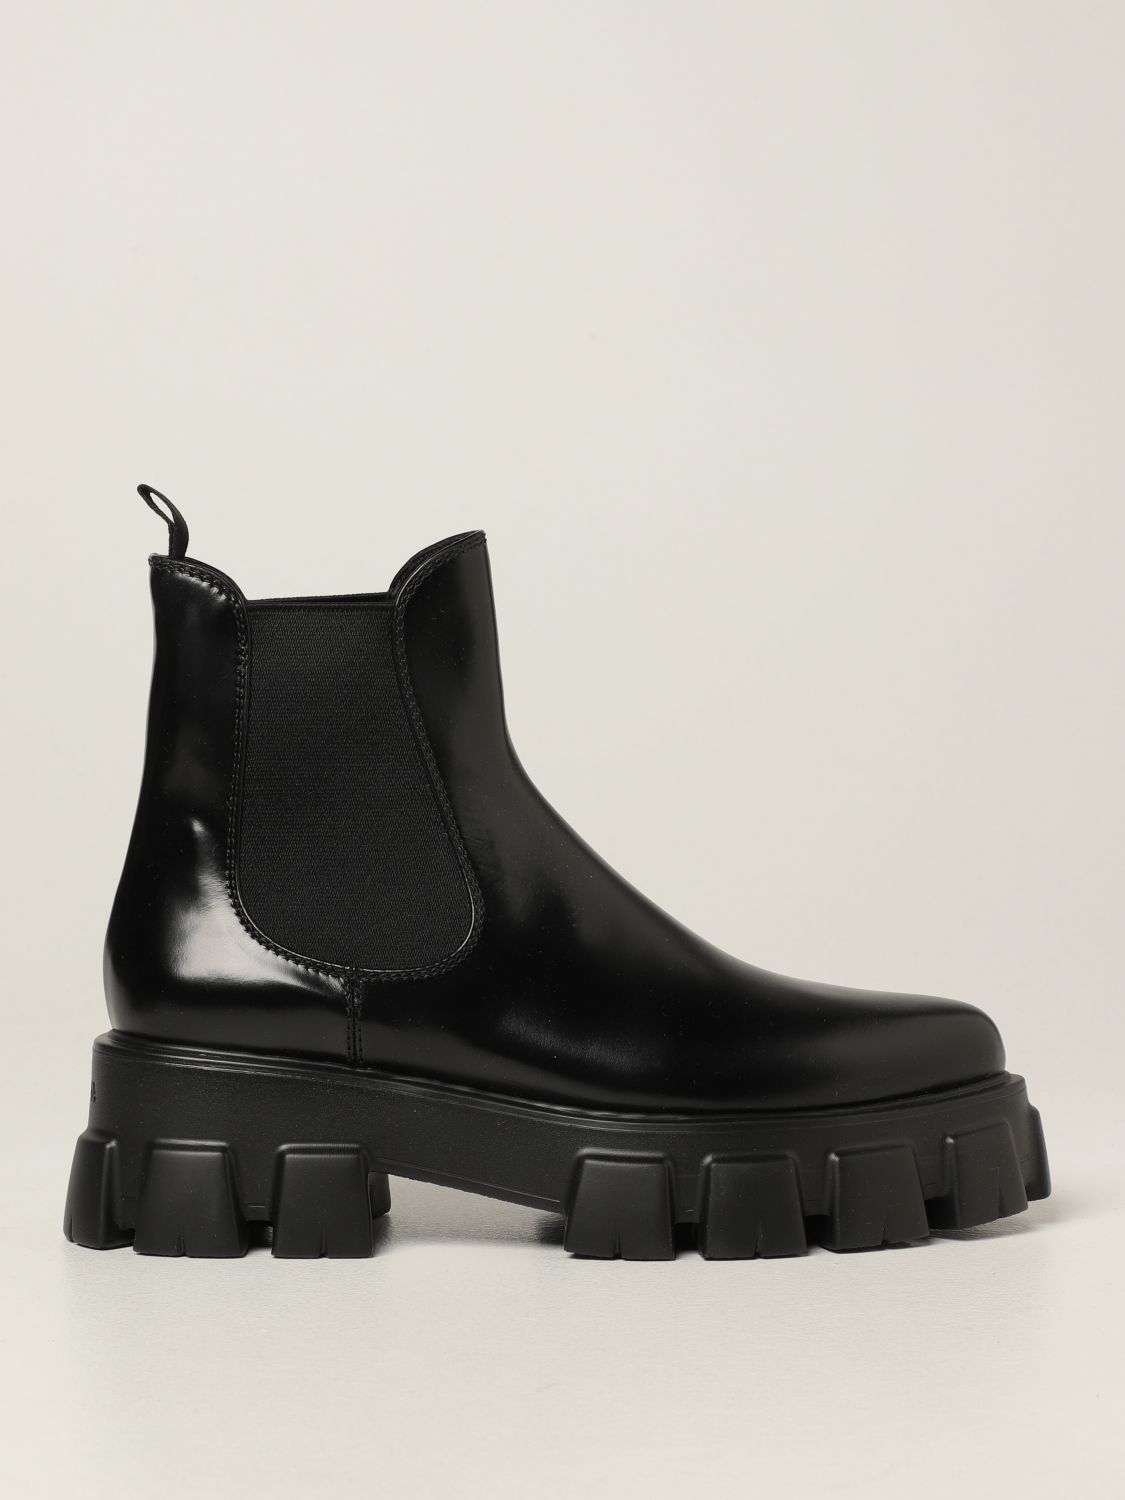 PRADA: Monolith ankle boots in brushed leather | Flat Booties Prada ...